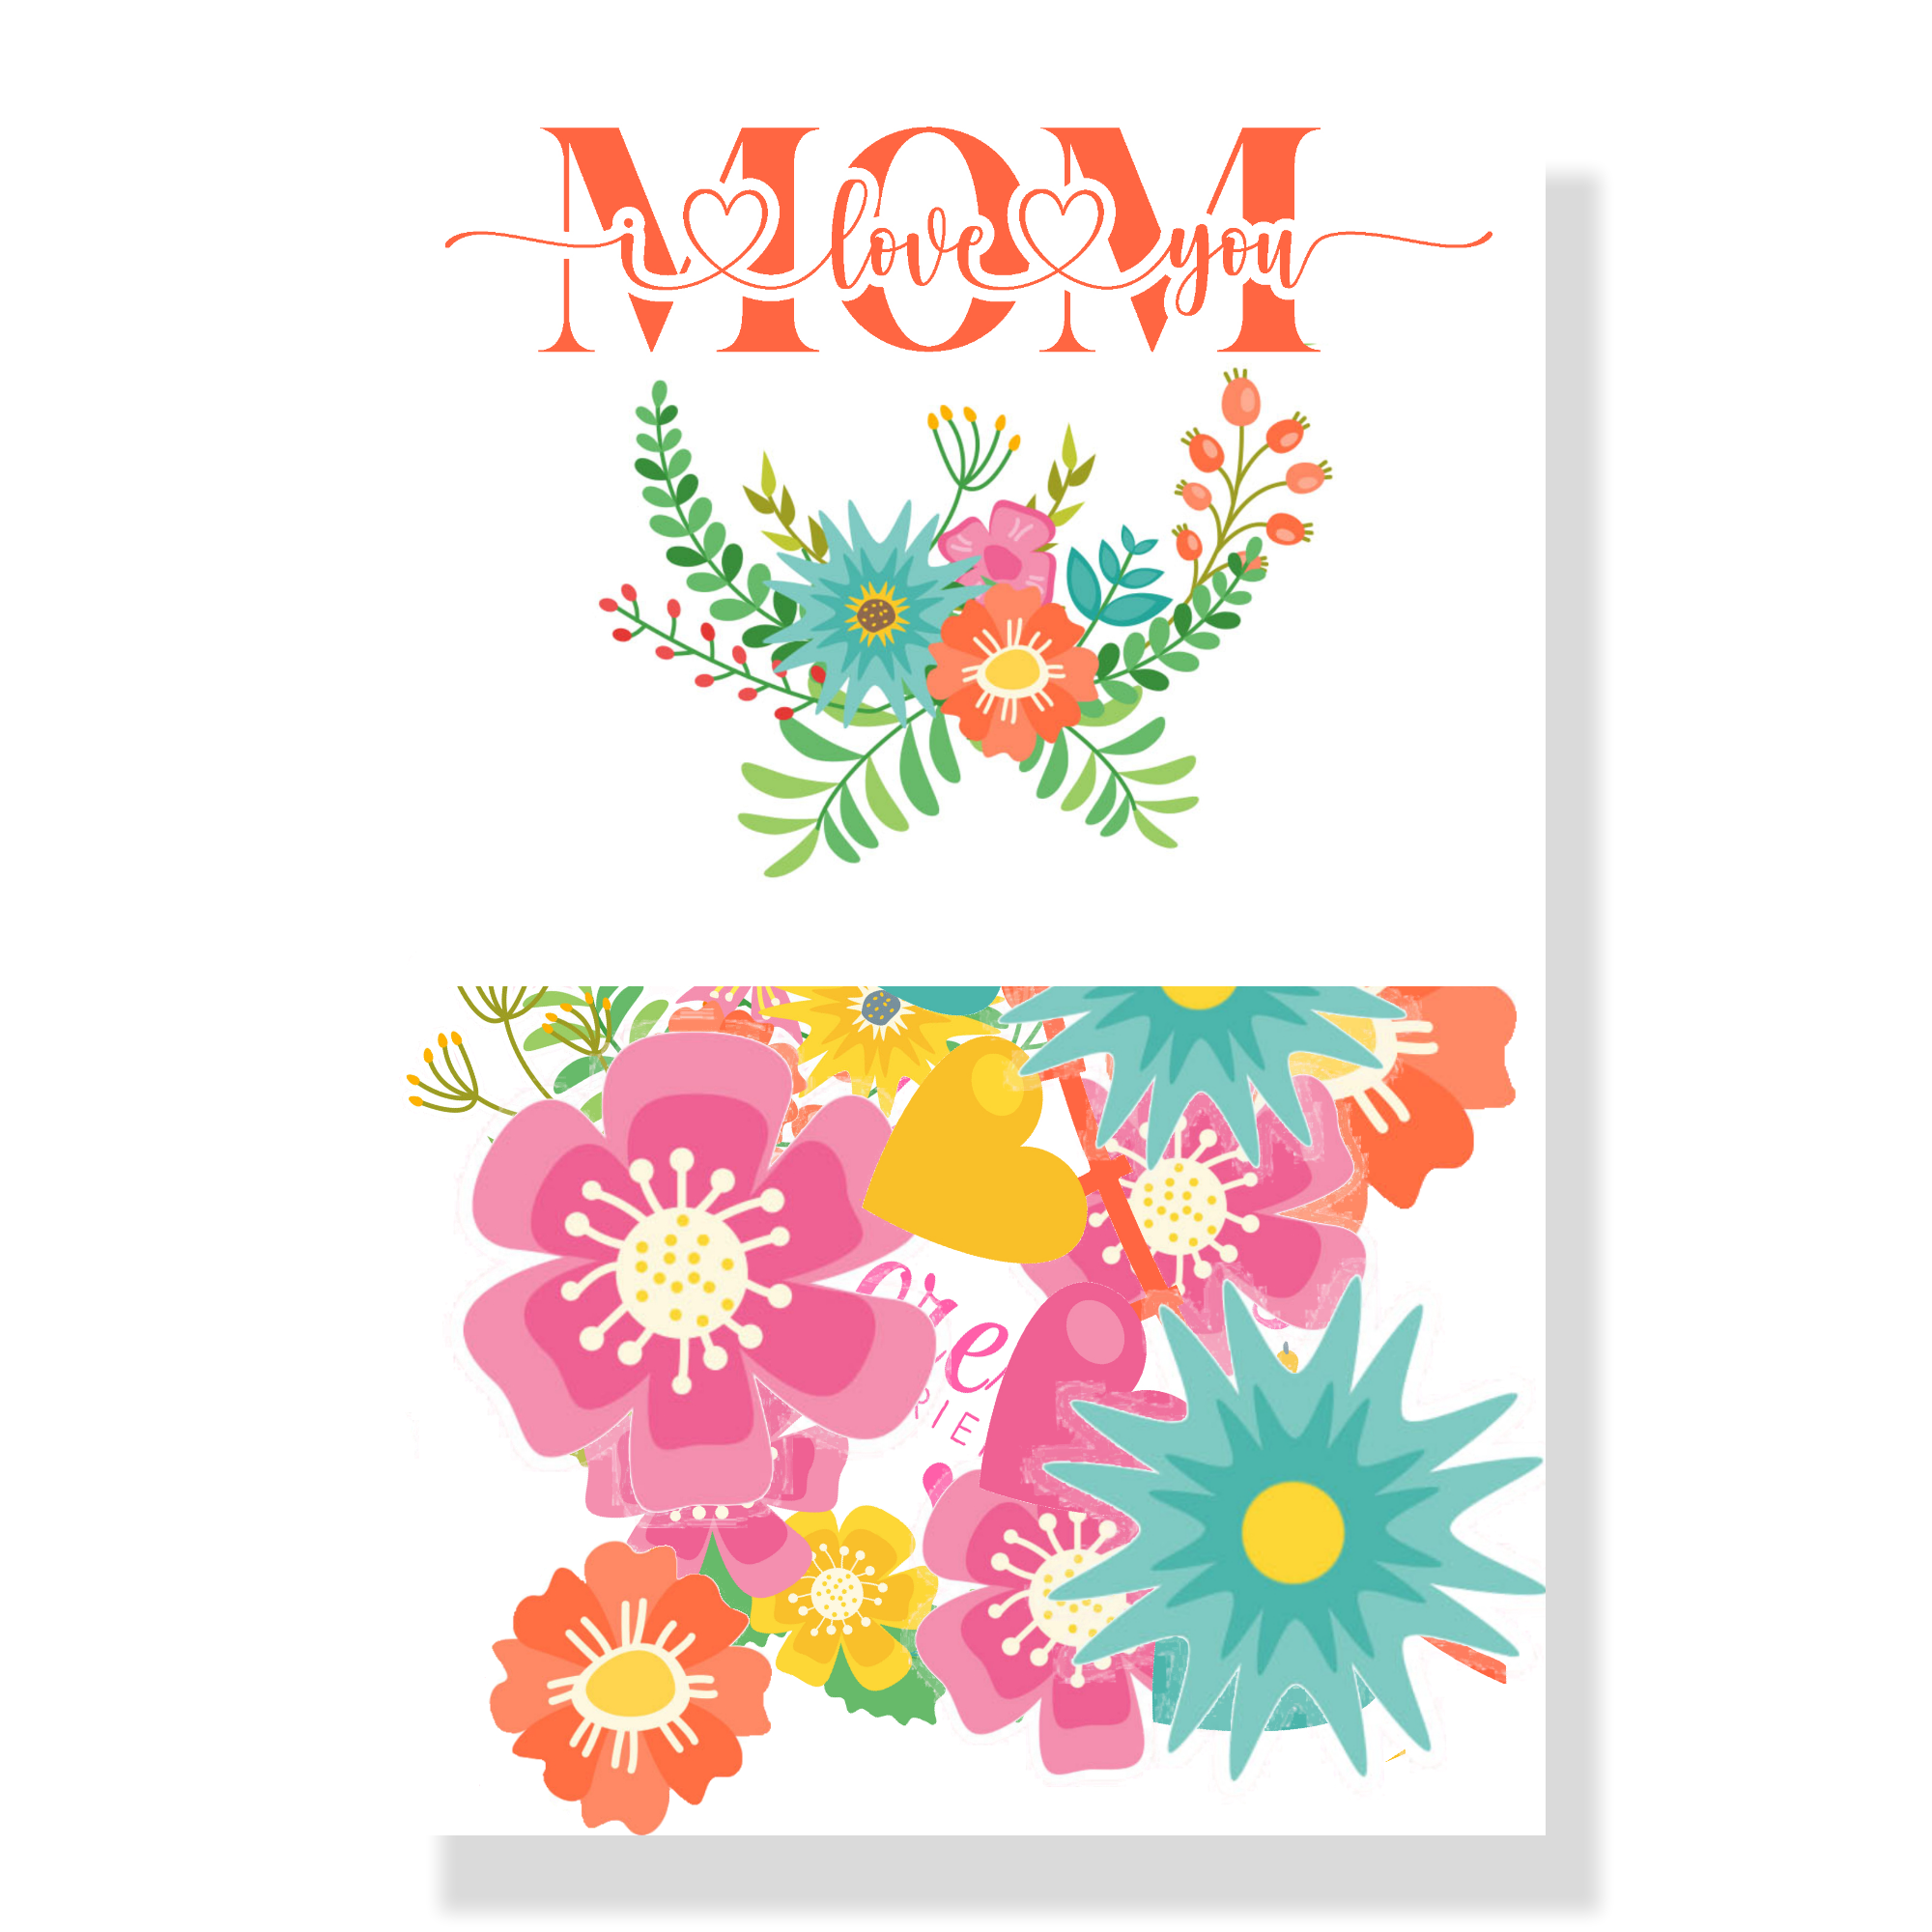 Happy Mother's Day Collection Laser Cut Scrapbook Ephemera Embellishments by SSC Designs